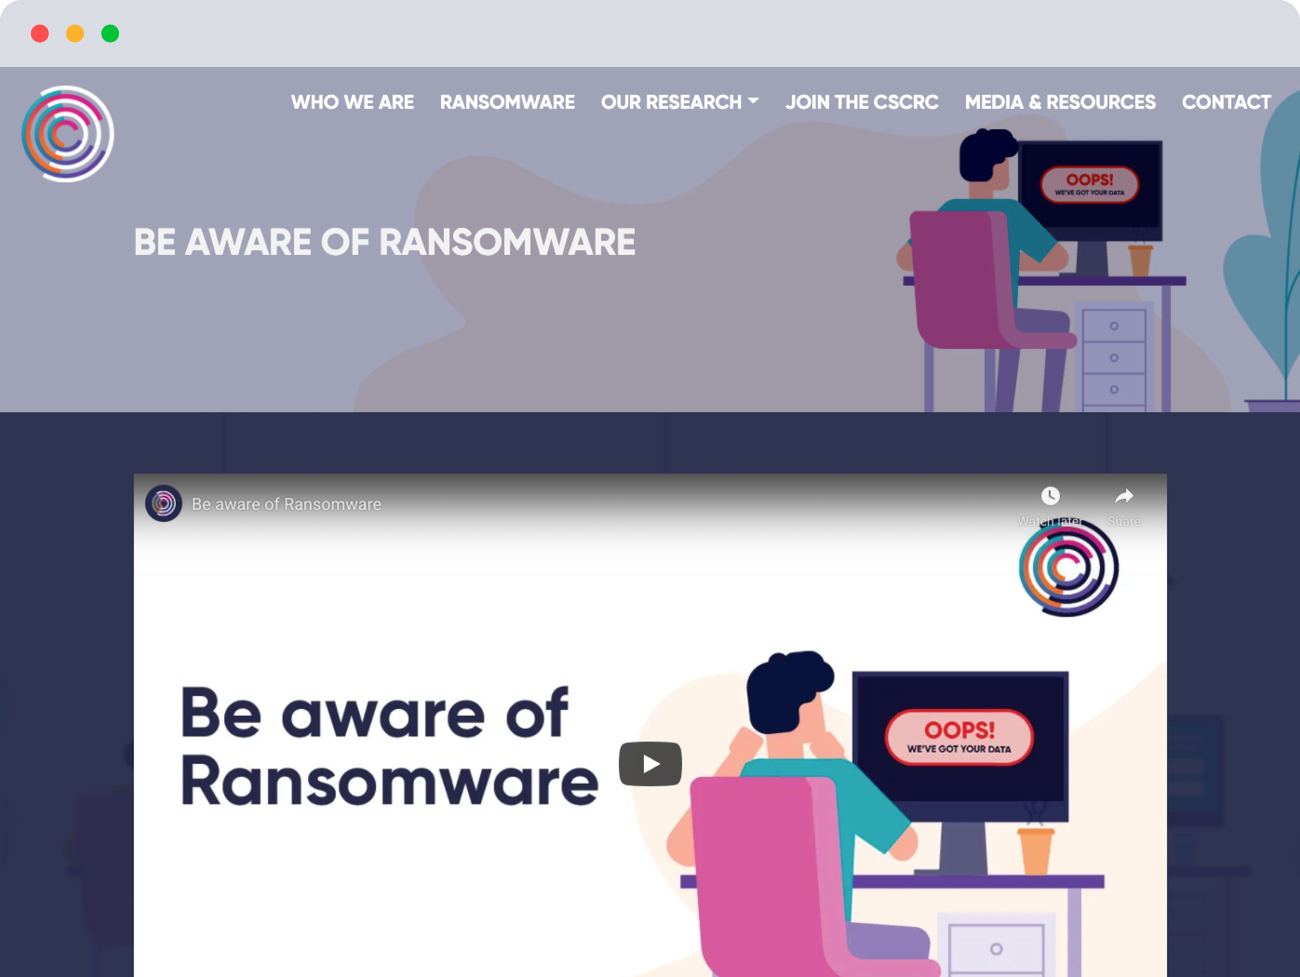 Be aware of ransomware